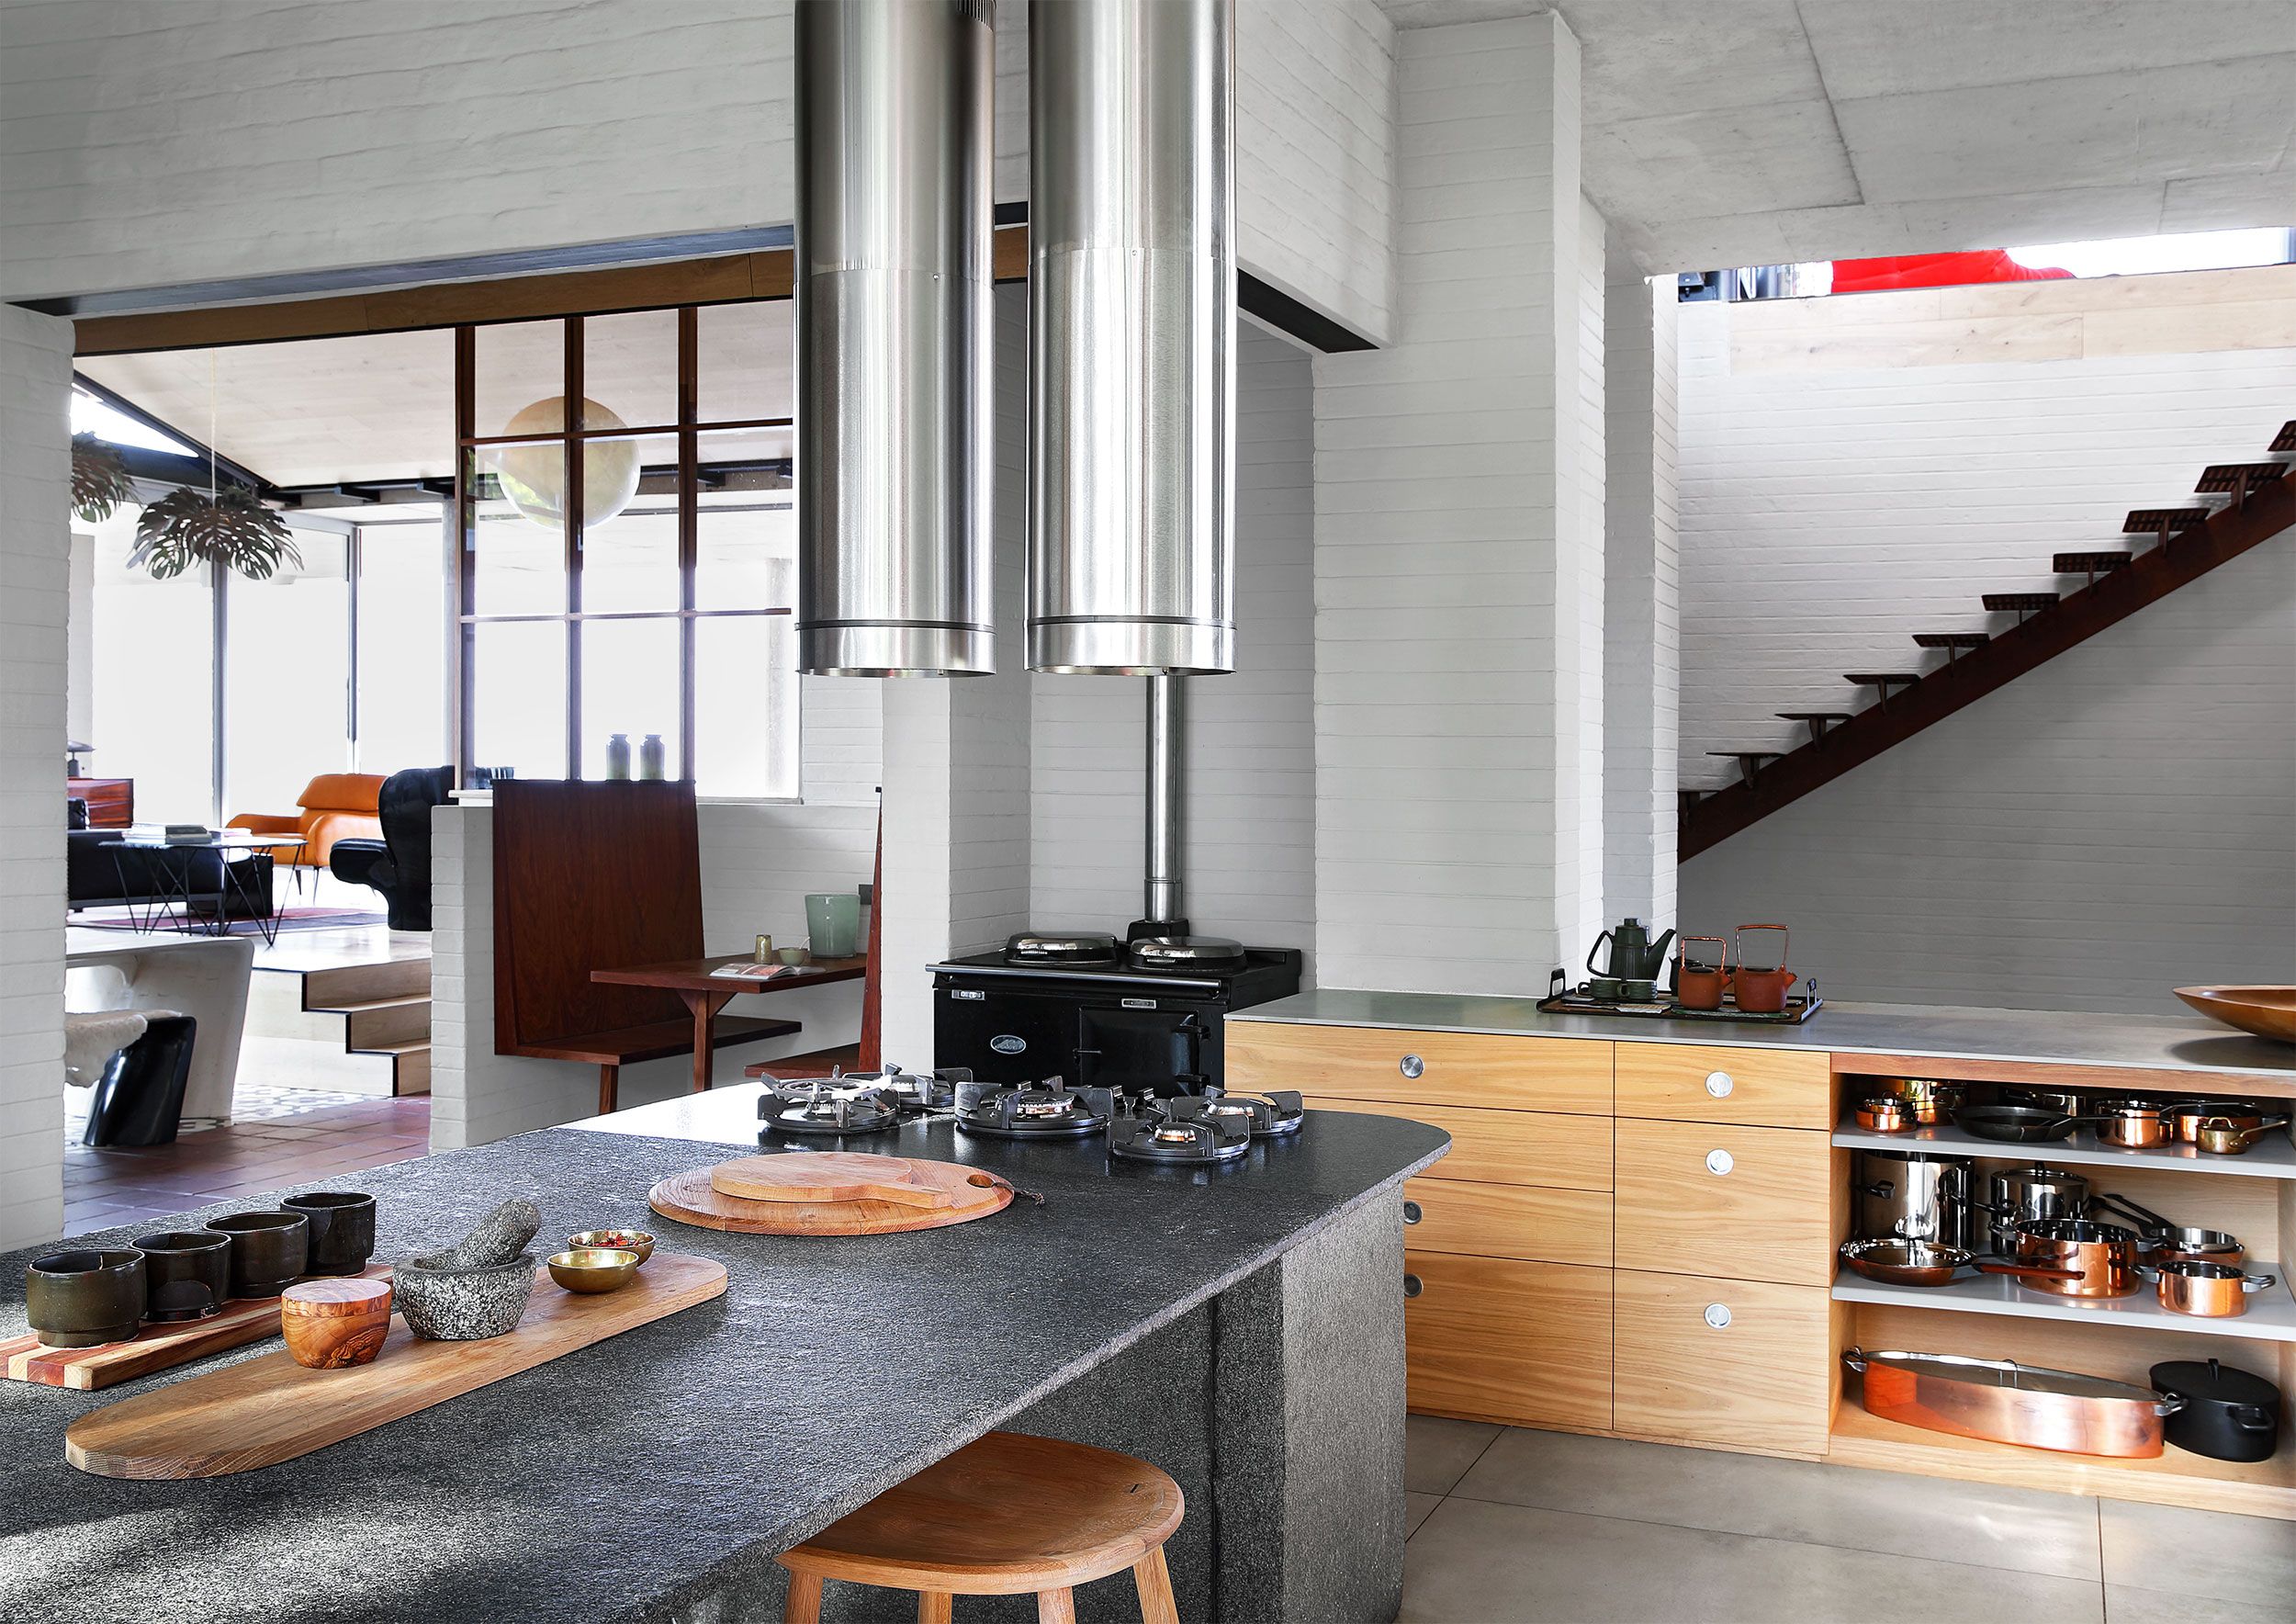 20+ Inspiring Modern Kitchens We Can't Stop Swooning Over